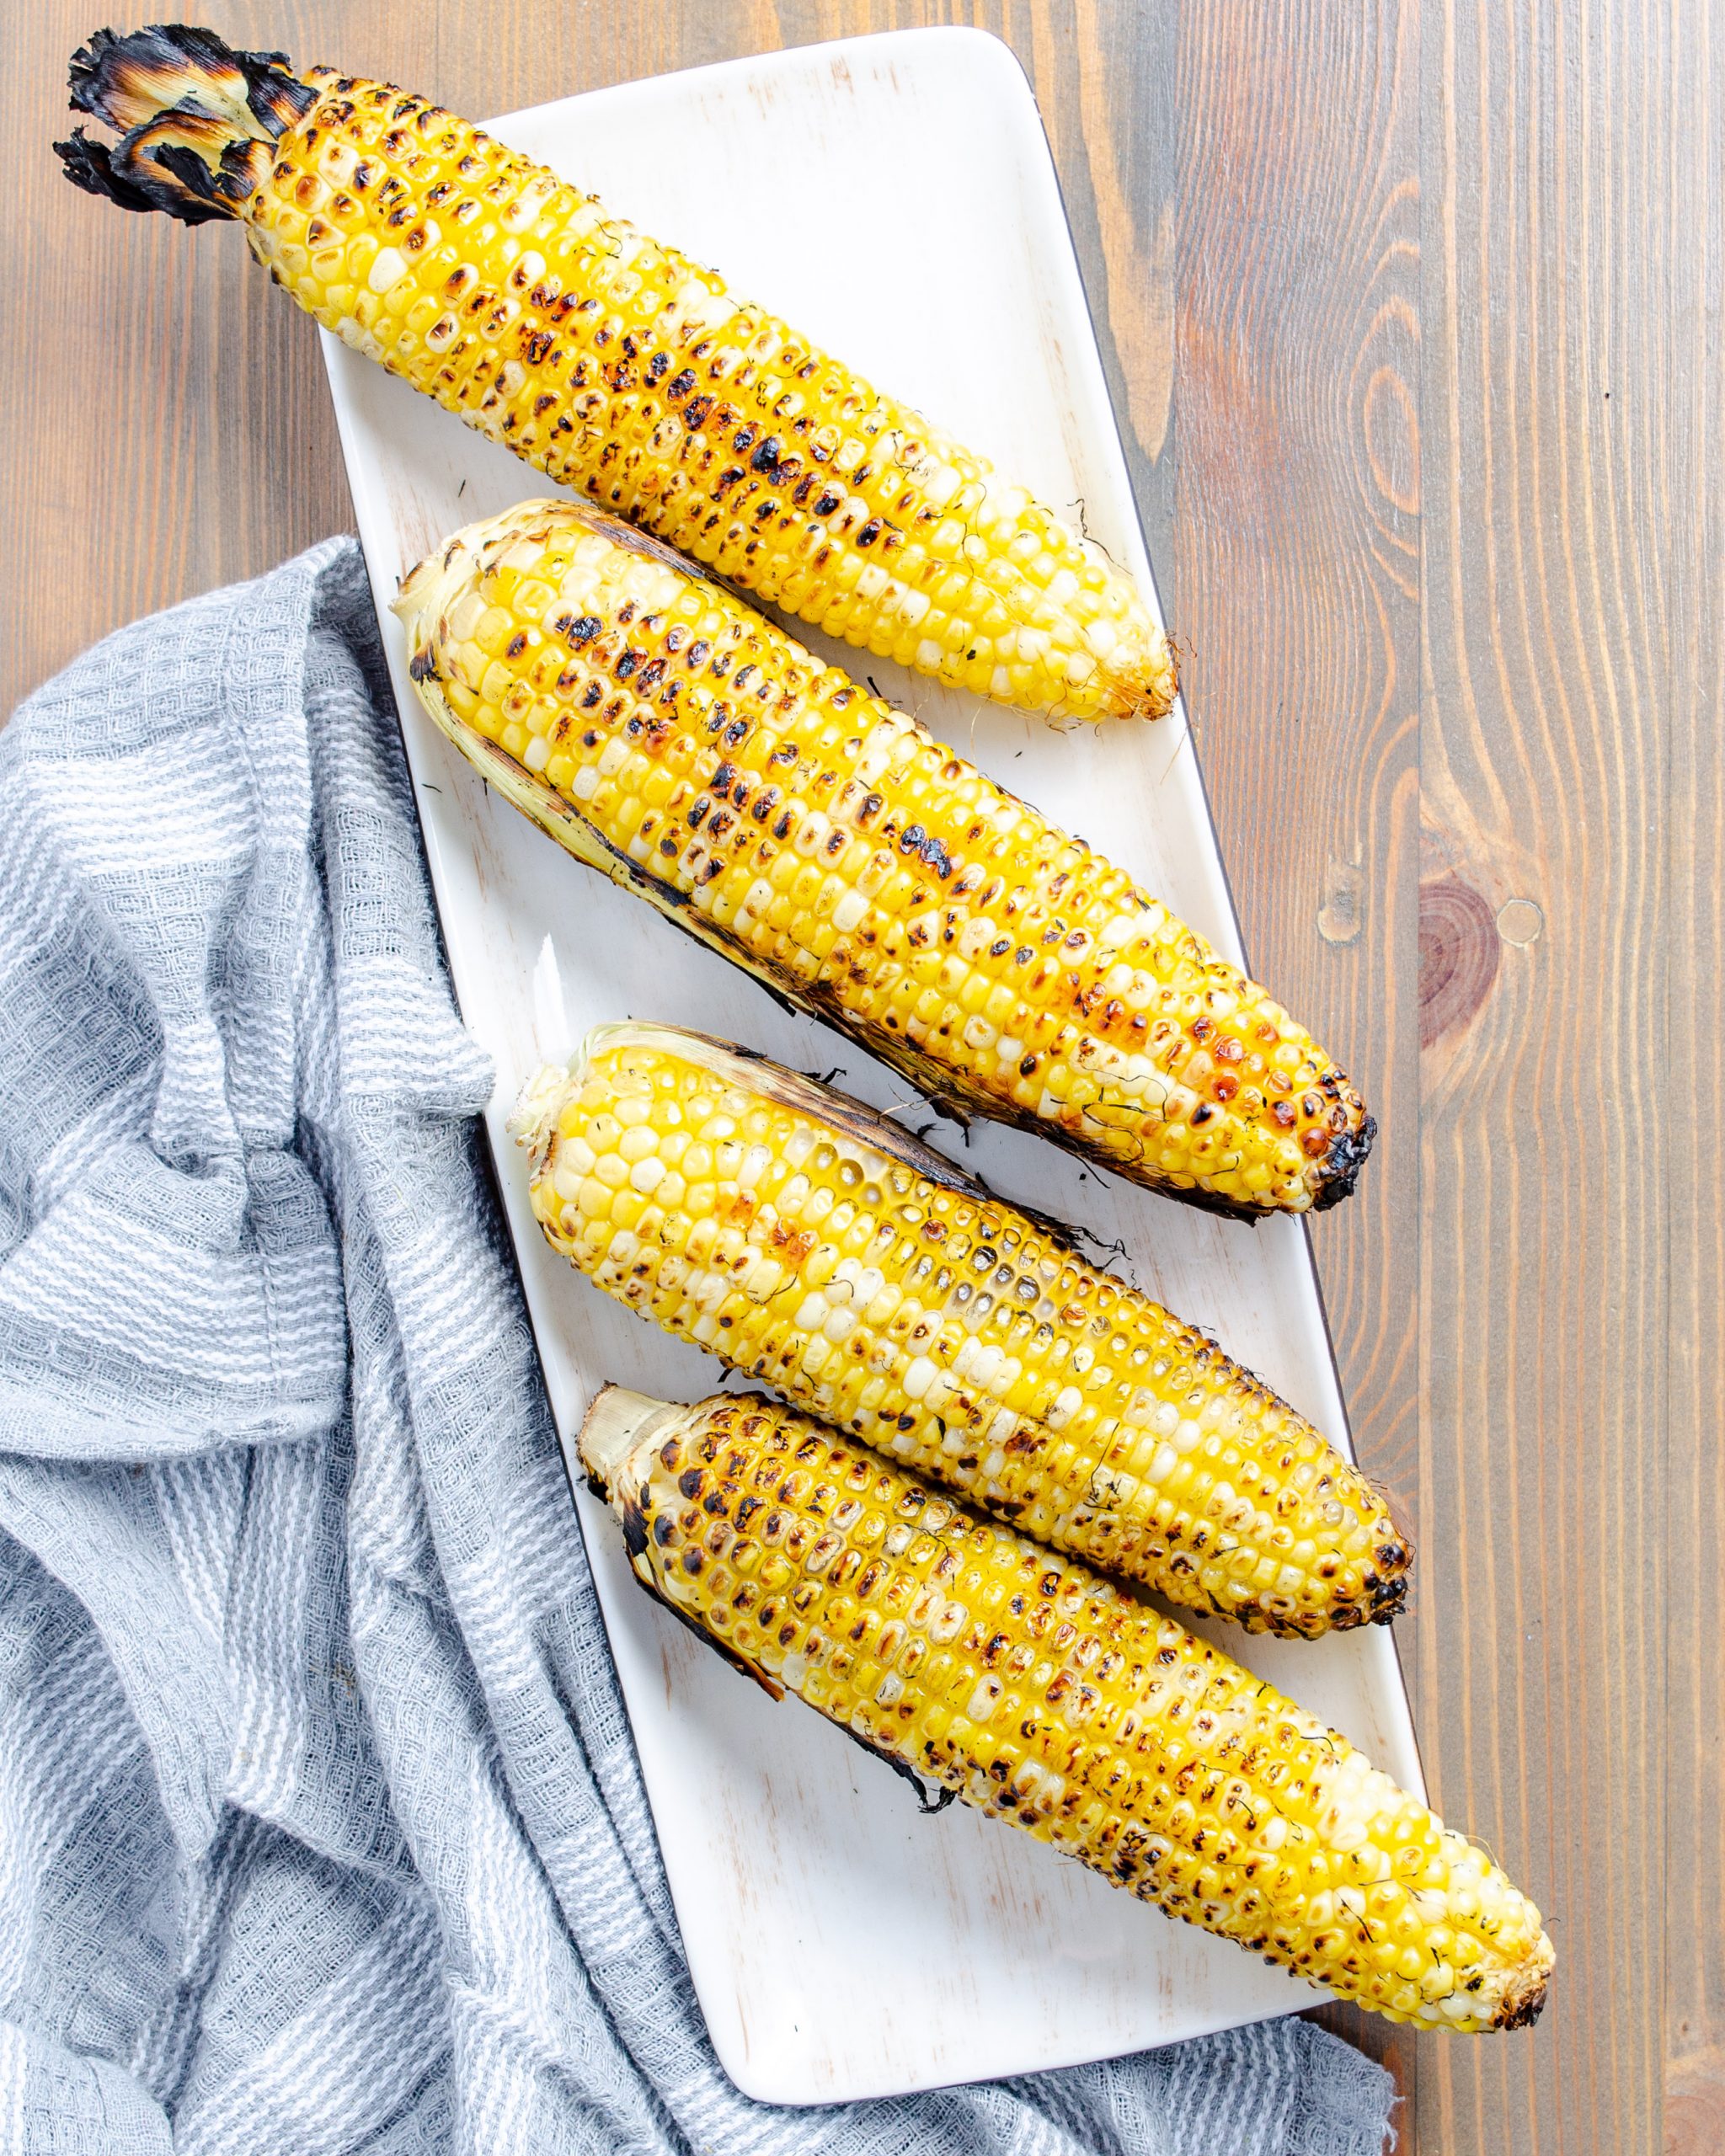 Preheat the grill to 400˚F. Place ears of corn until grilled for about 12 minutes, turning around every few minutes to ensure even grilling on each side.